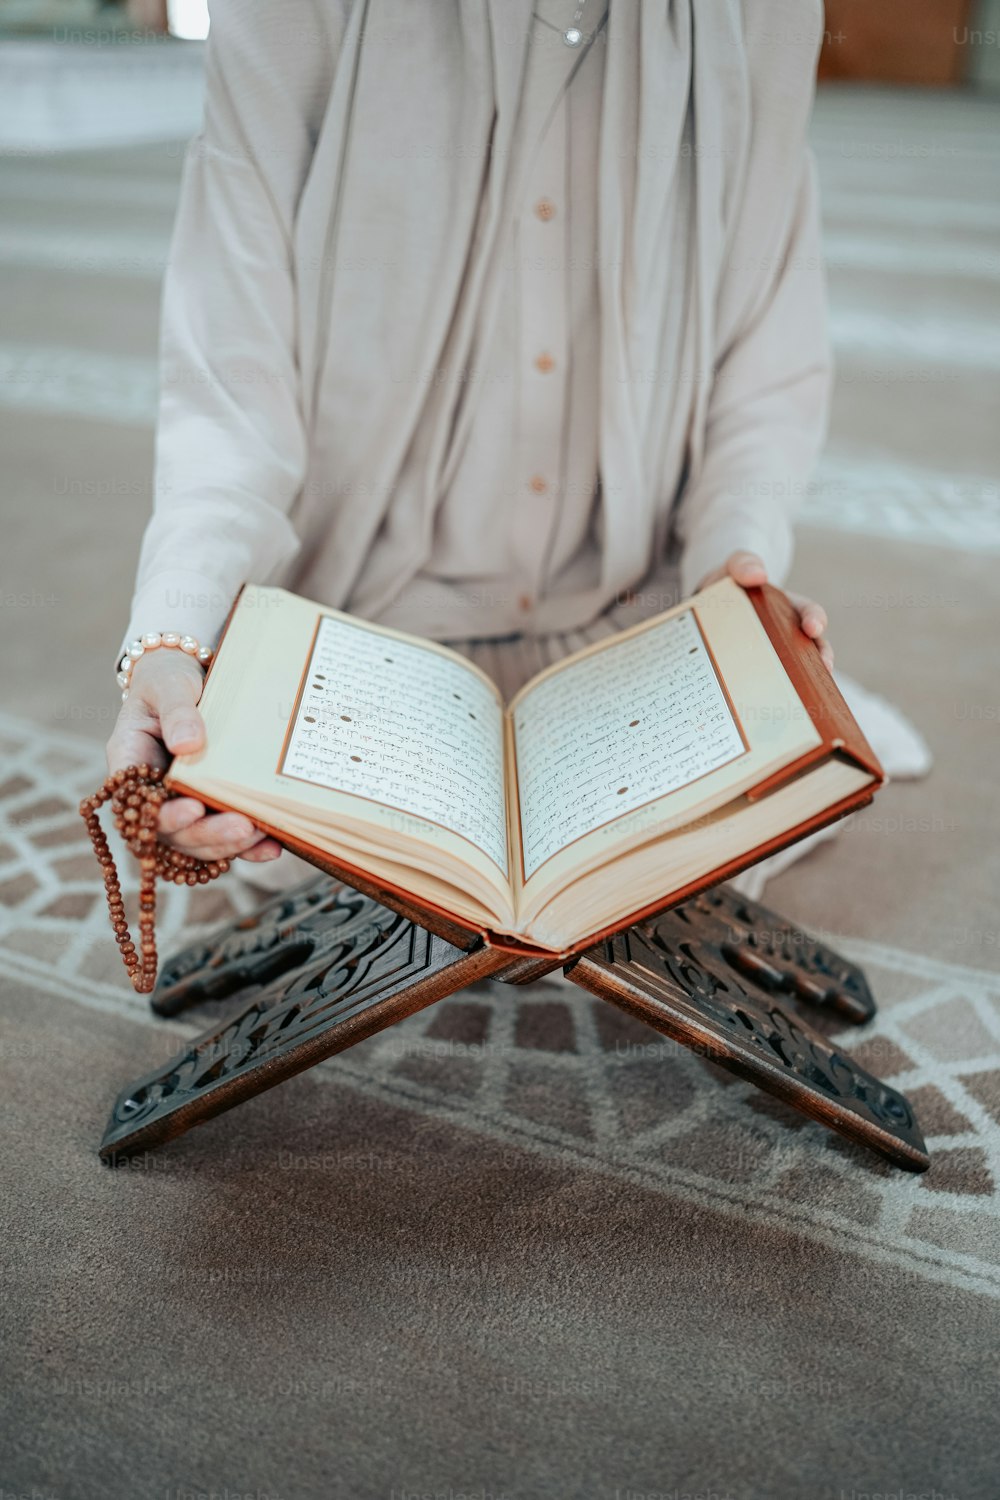 a person kneeling down with a book in their hands